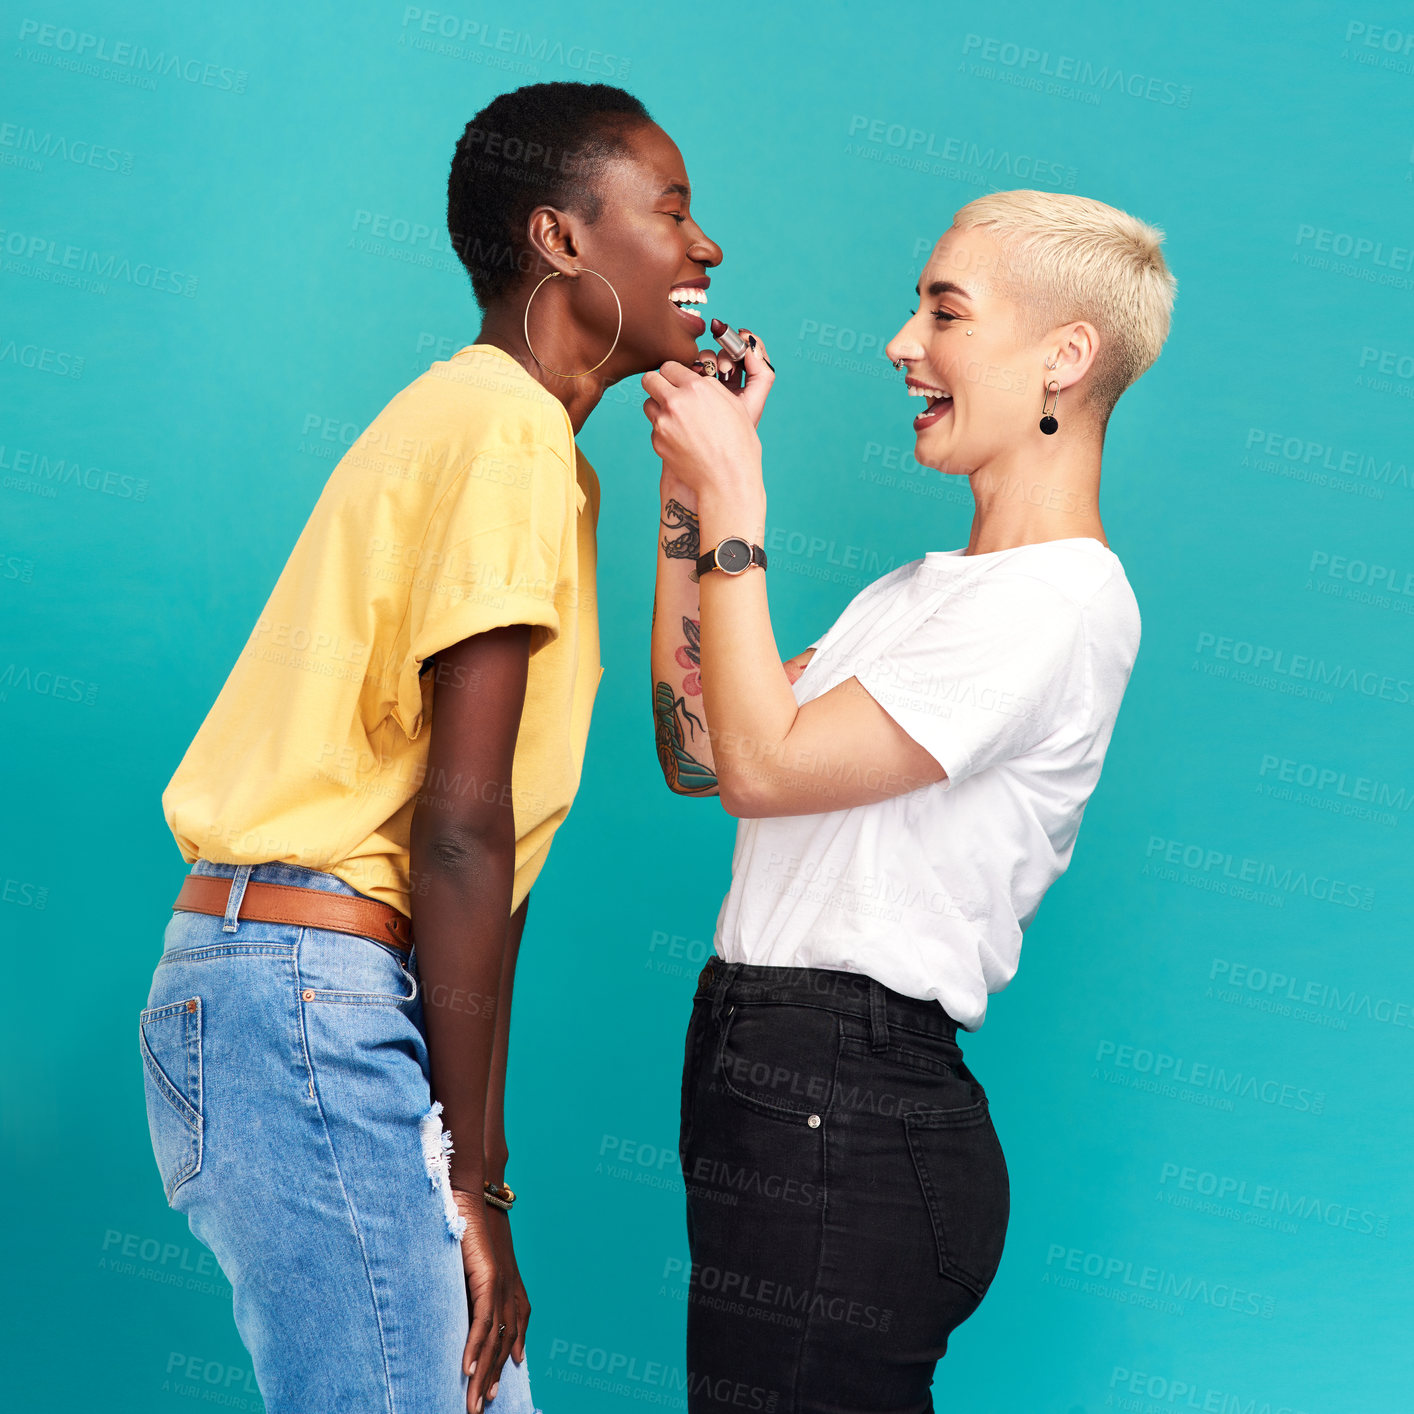 Buy stock photo Studio shot of a young woman putting lipstick on her friend against a turquoise background